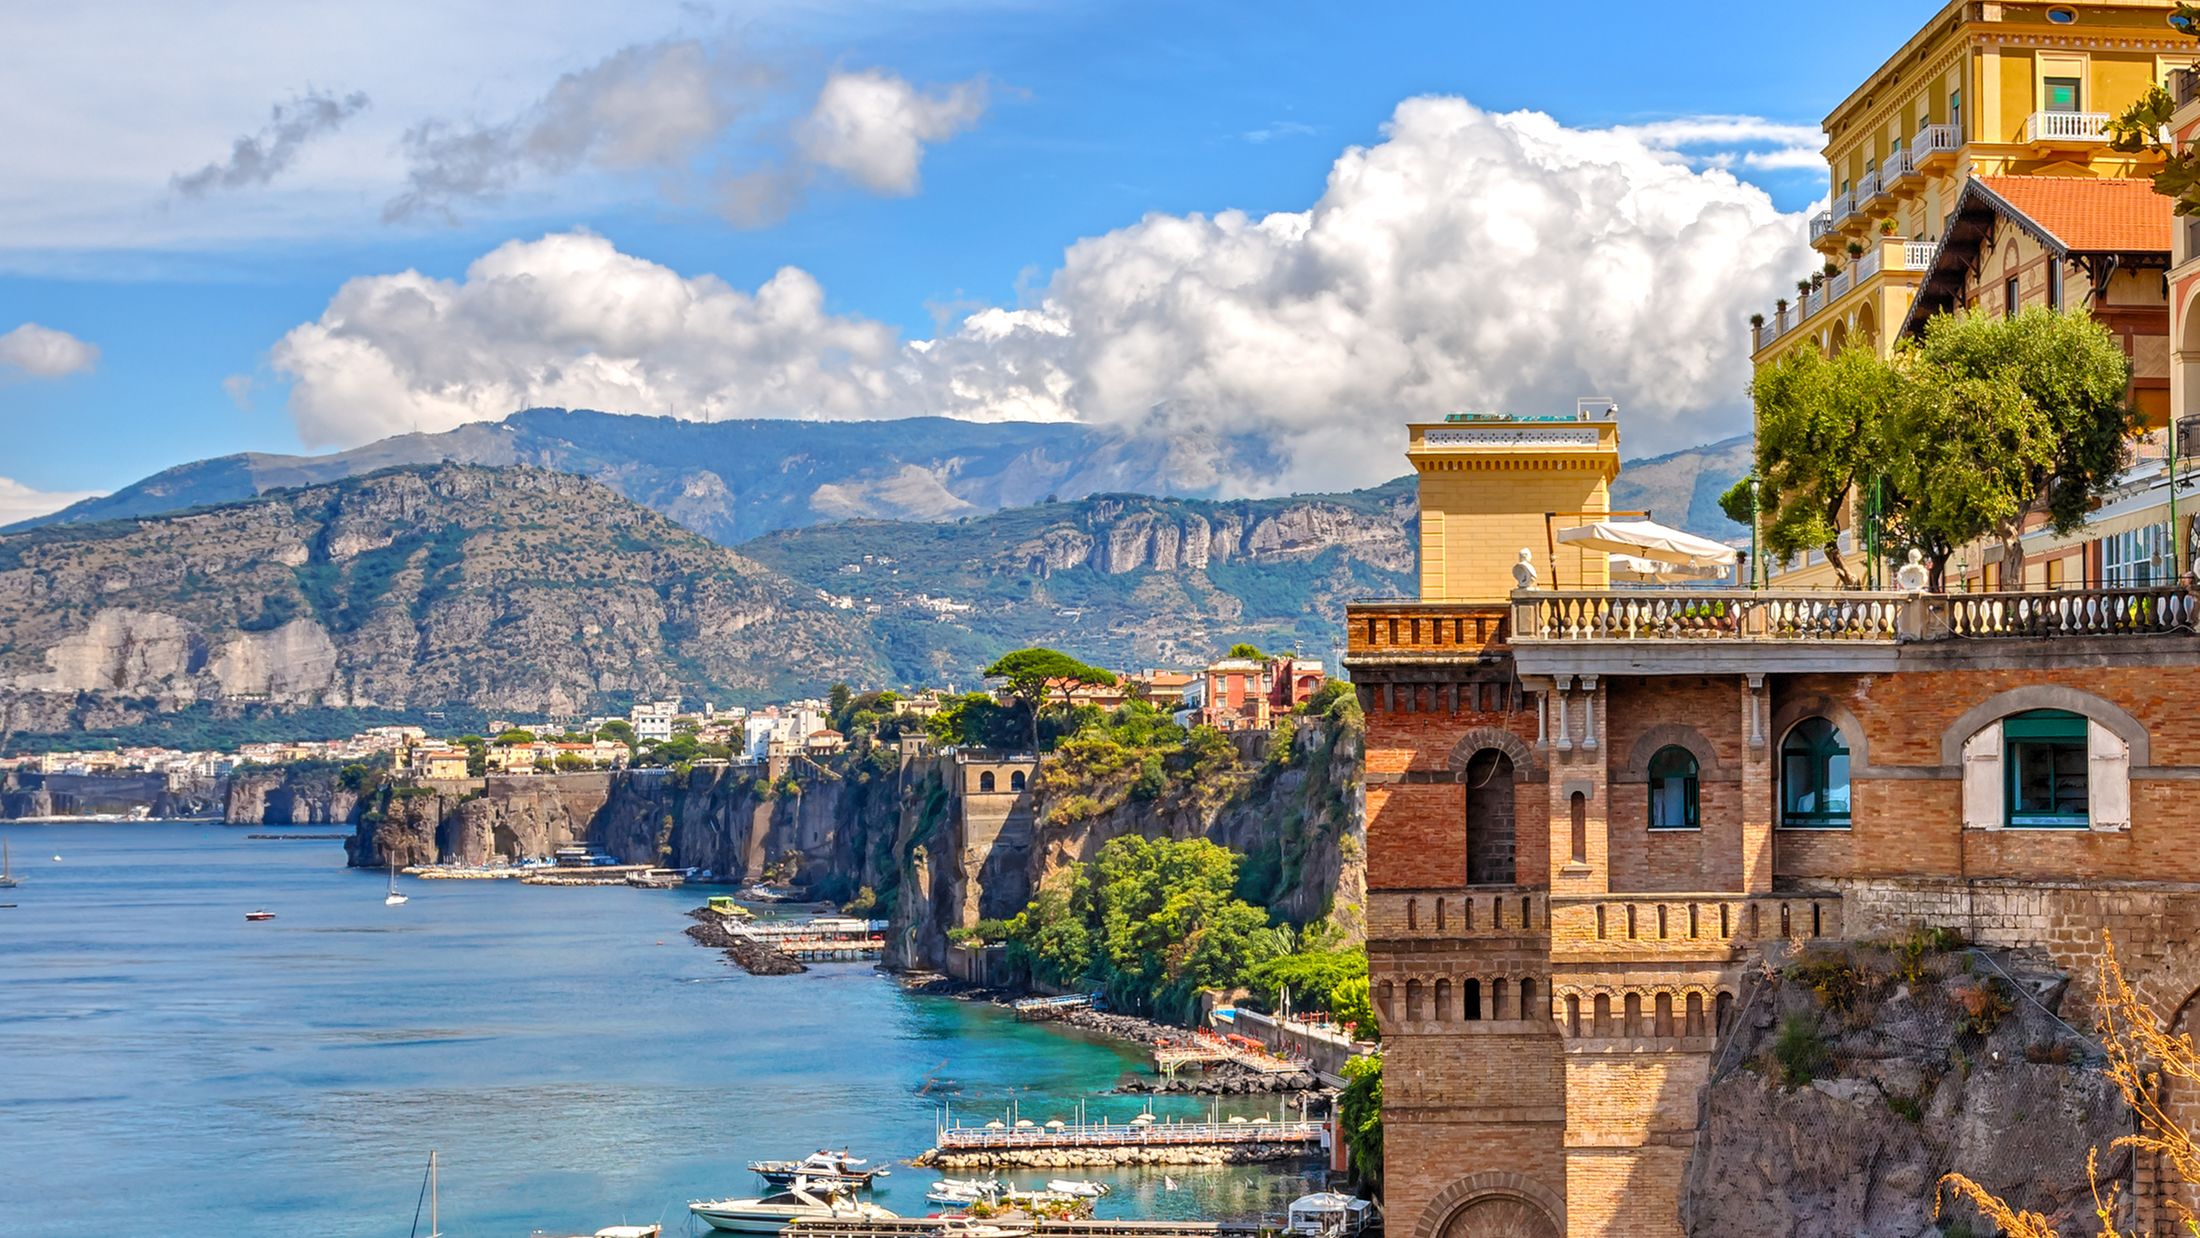 A view of the coast of Sorrento, with a classic building on the right, and mountains in the background